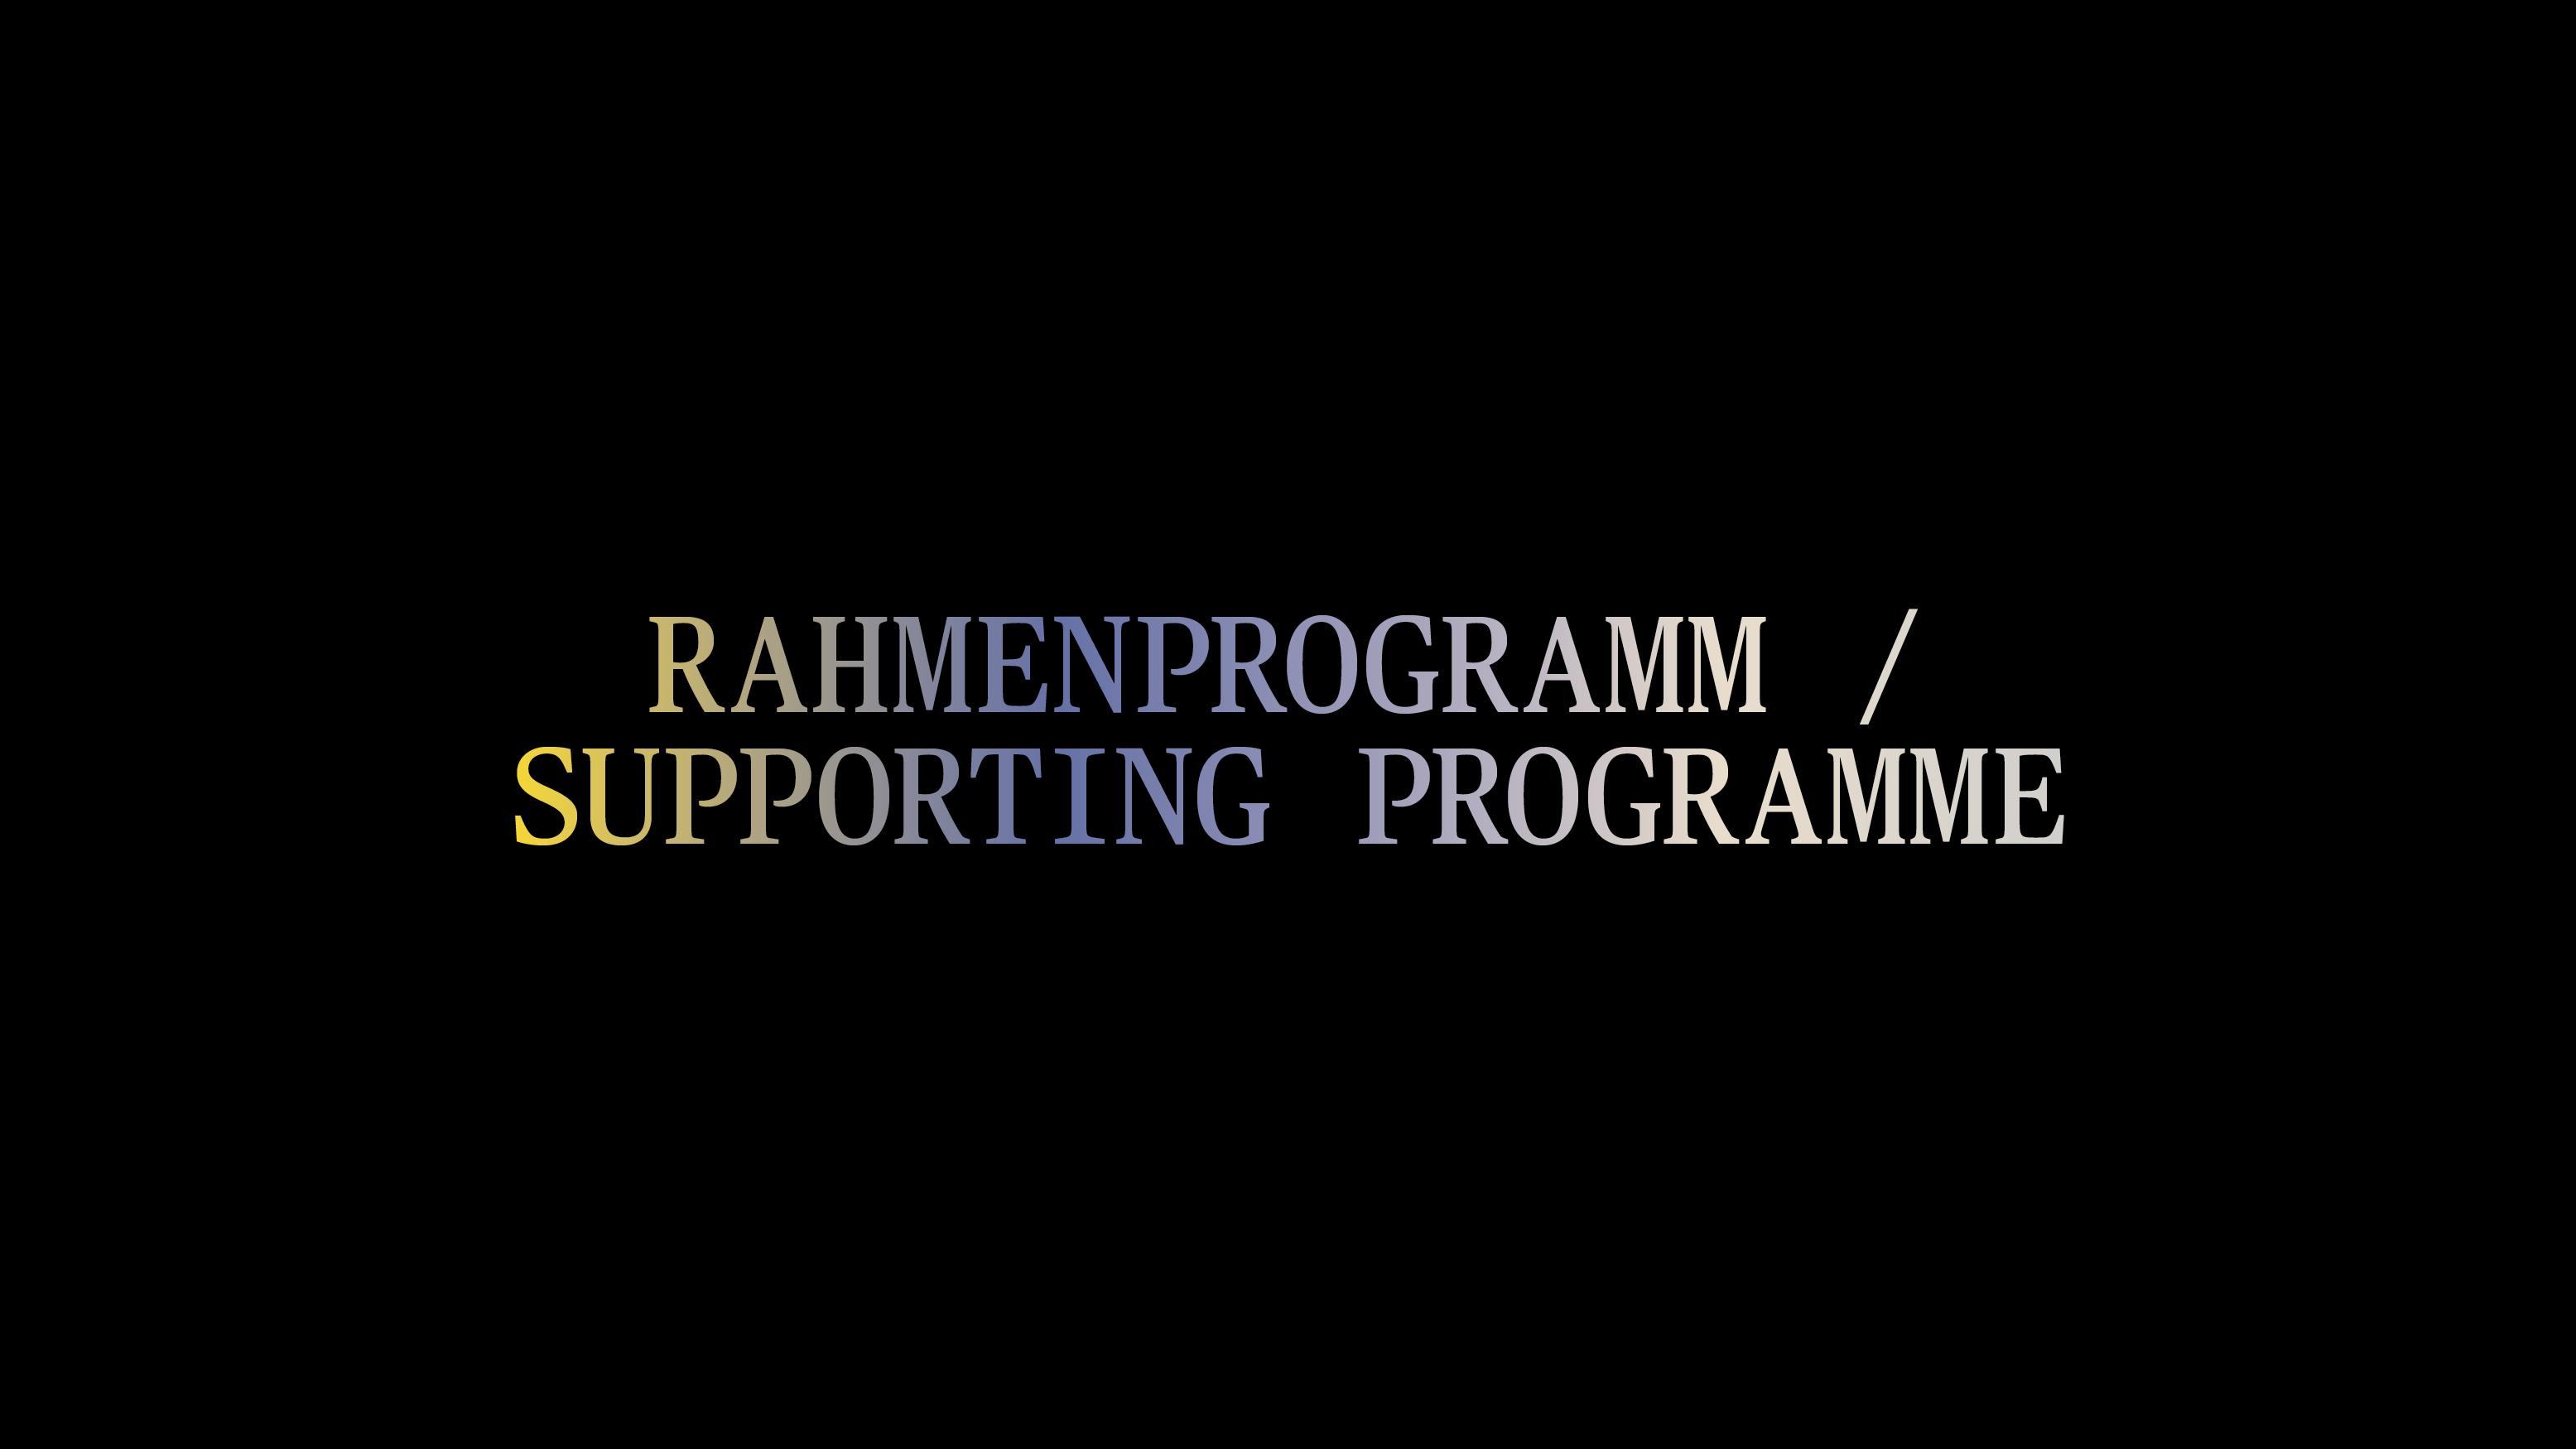 SUPPORTING PROGRAMME